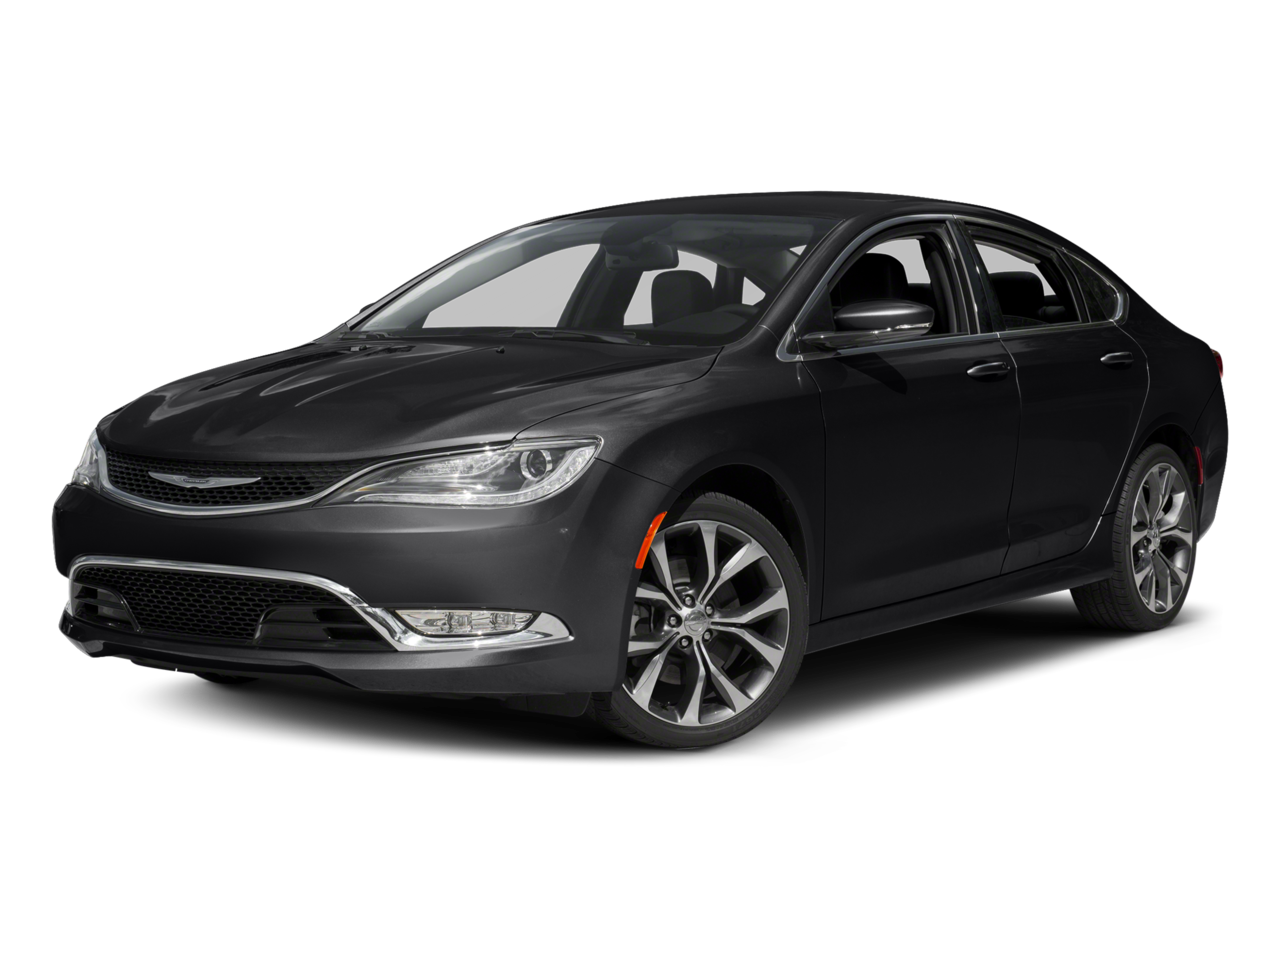 2016 Chrysler 200 Repair: Service and Maintenance Cost